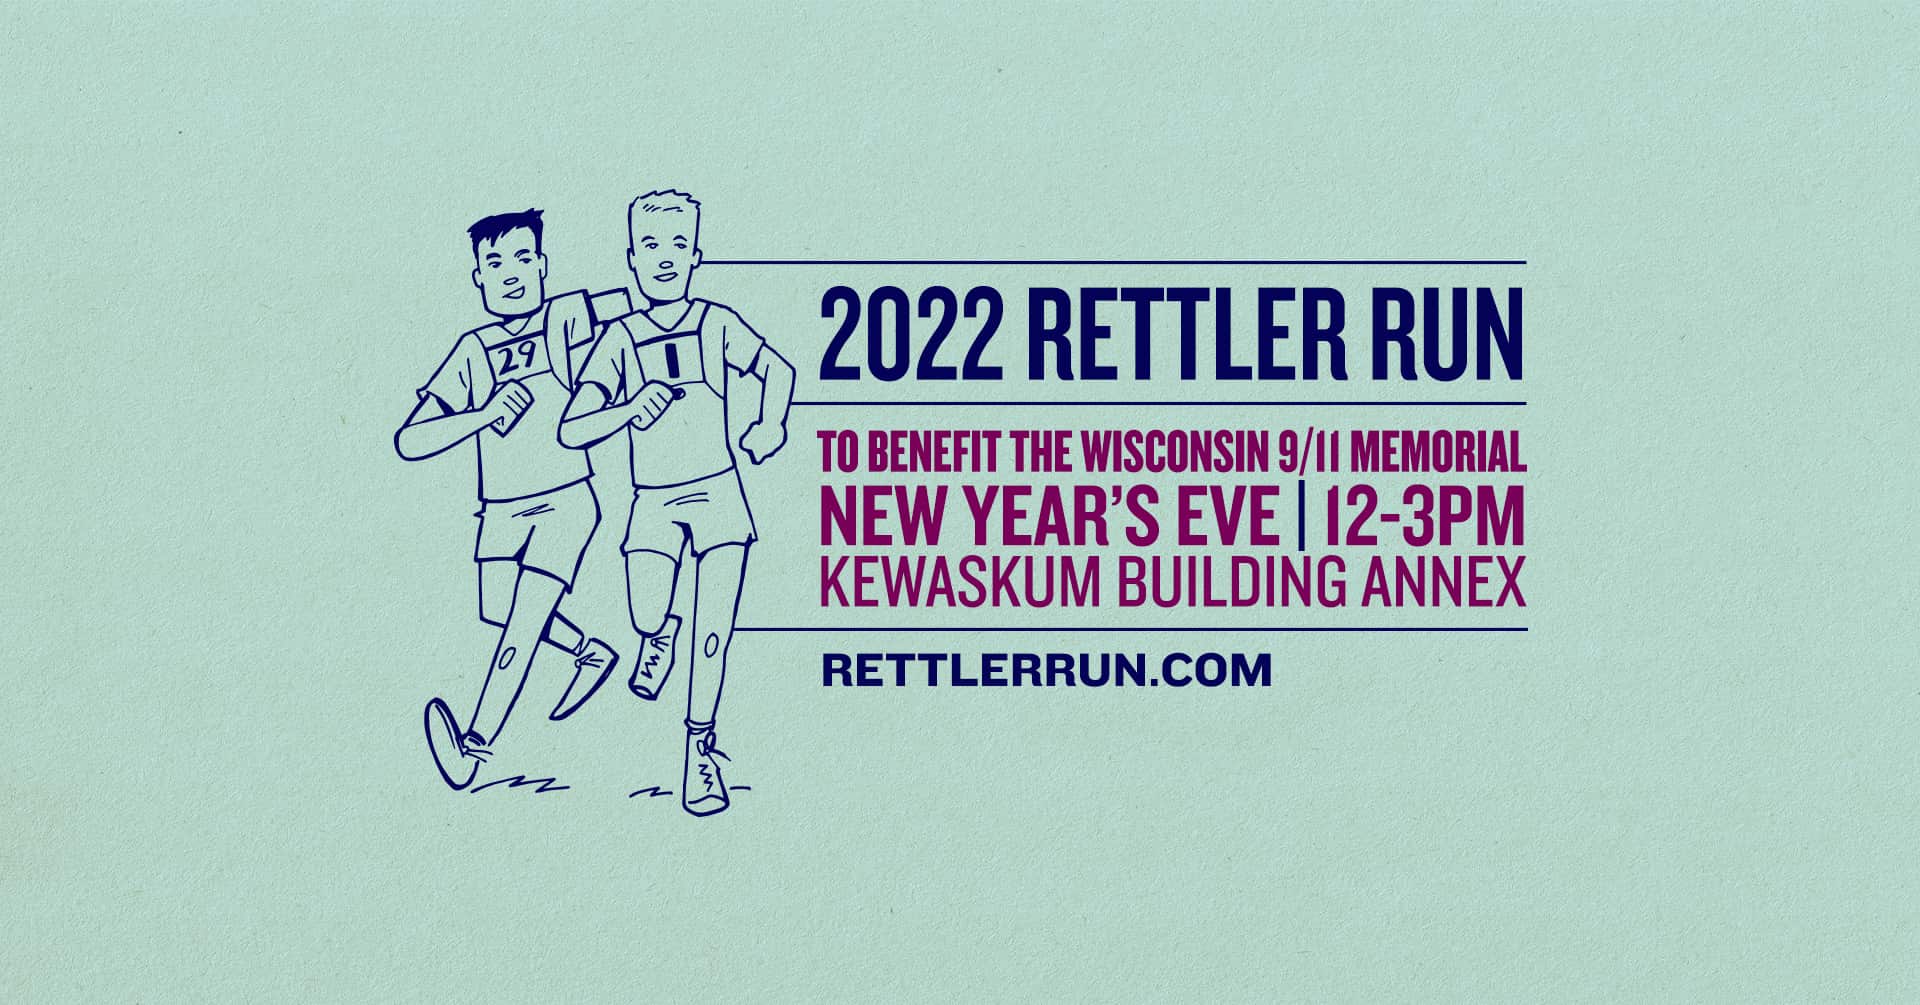 A cartoon version of Pete and Jack Rettler running with text that reads "Rettler Run 2022" and gives the details on the run, which takes place on New Year's Eve 2022 from 12-3p at the Kewaskum Building Annex.